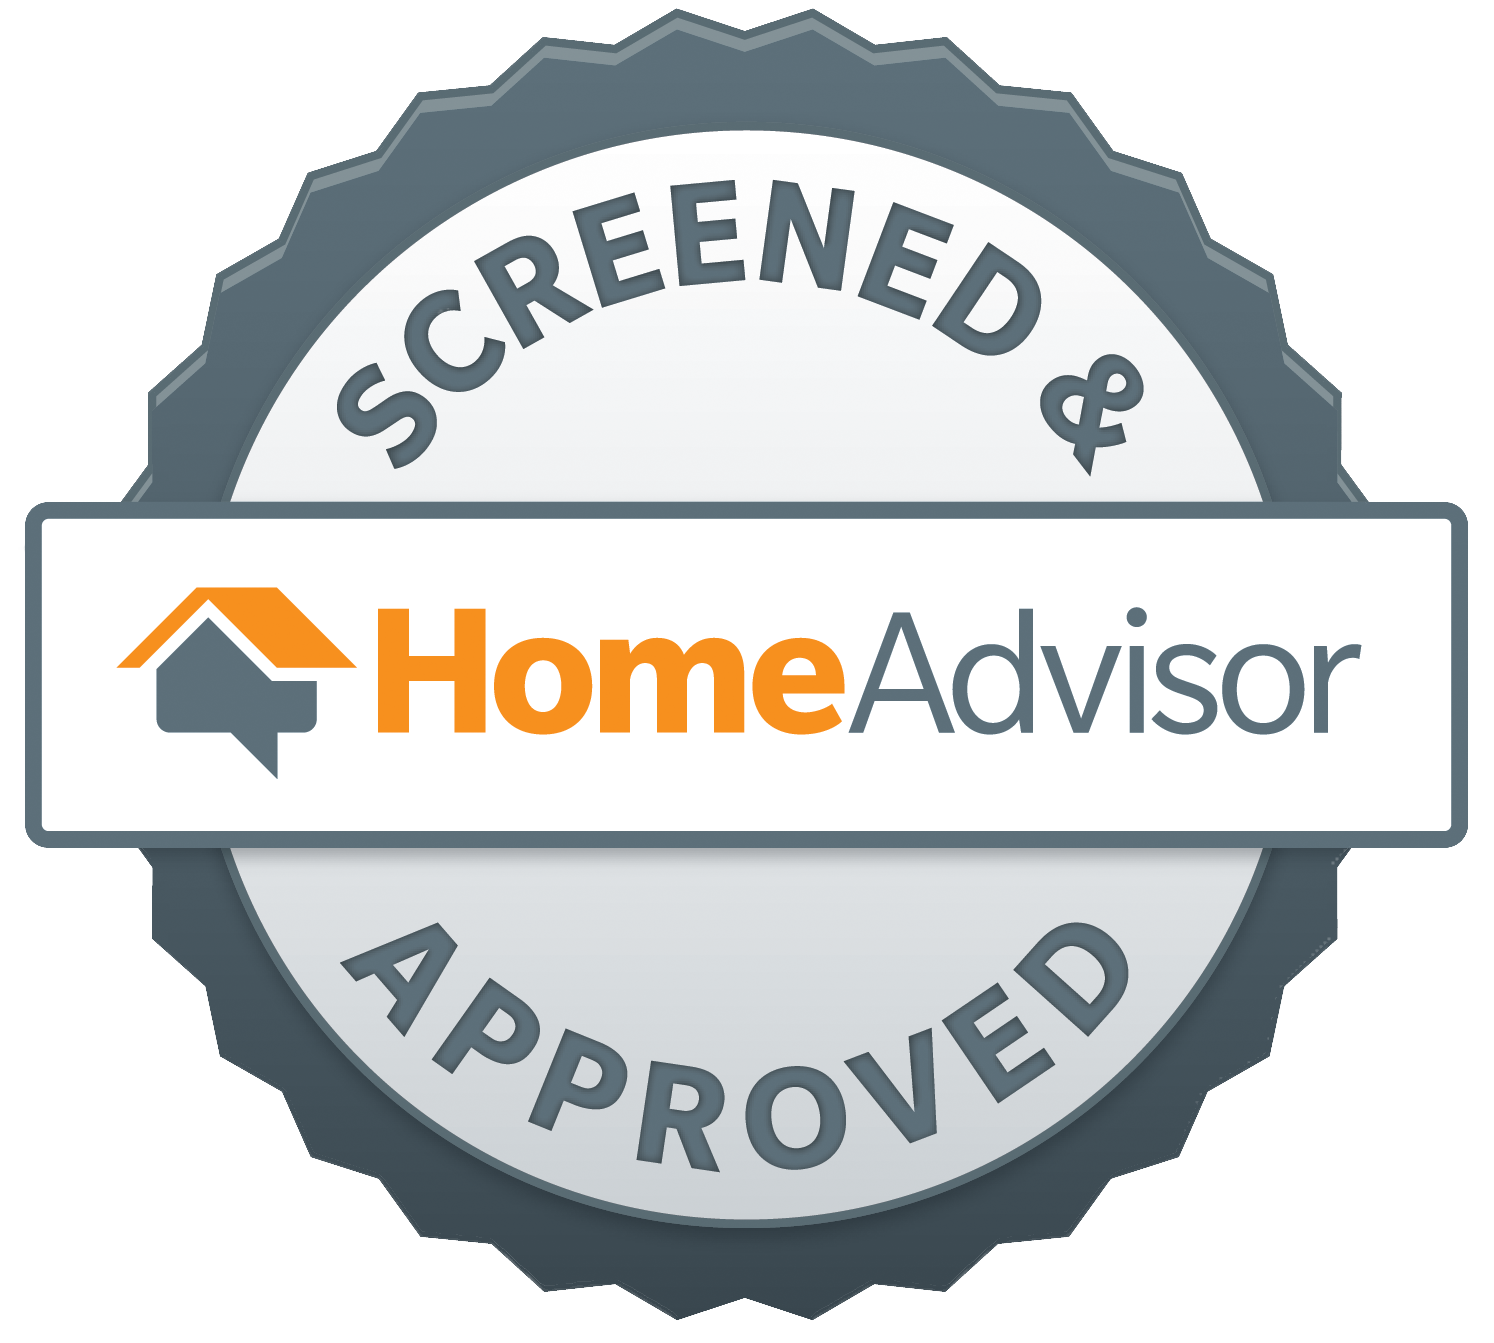 River City Pressure Washing Is Screen And Approved By Home Advisor